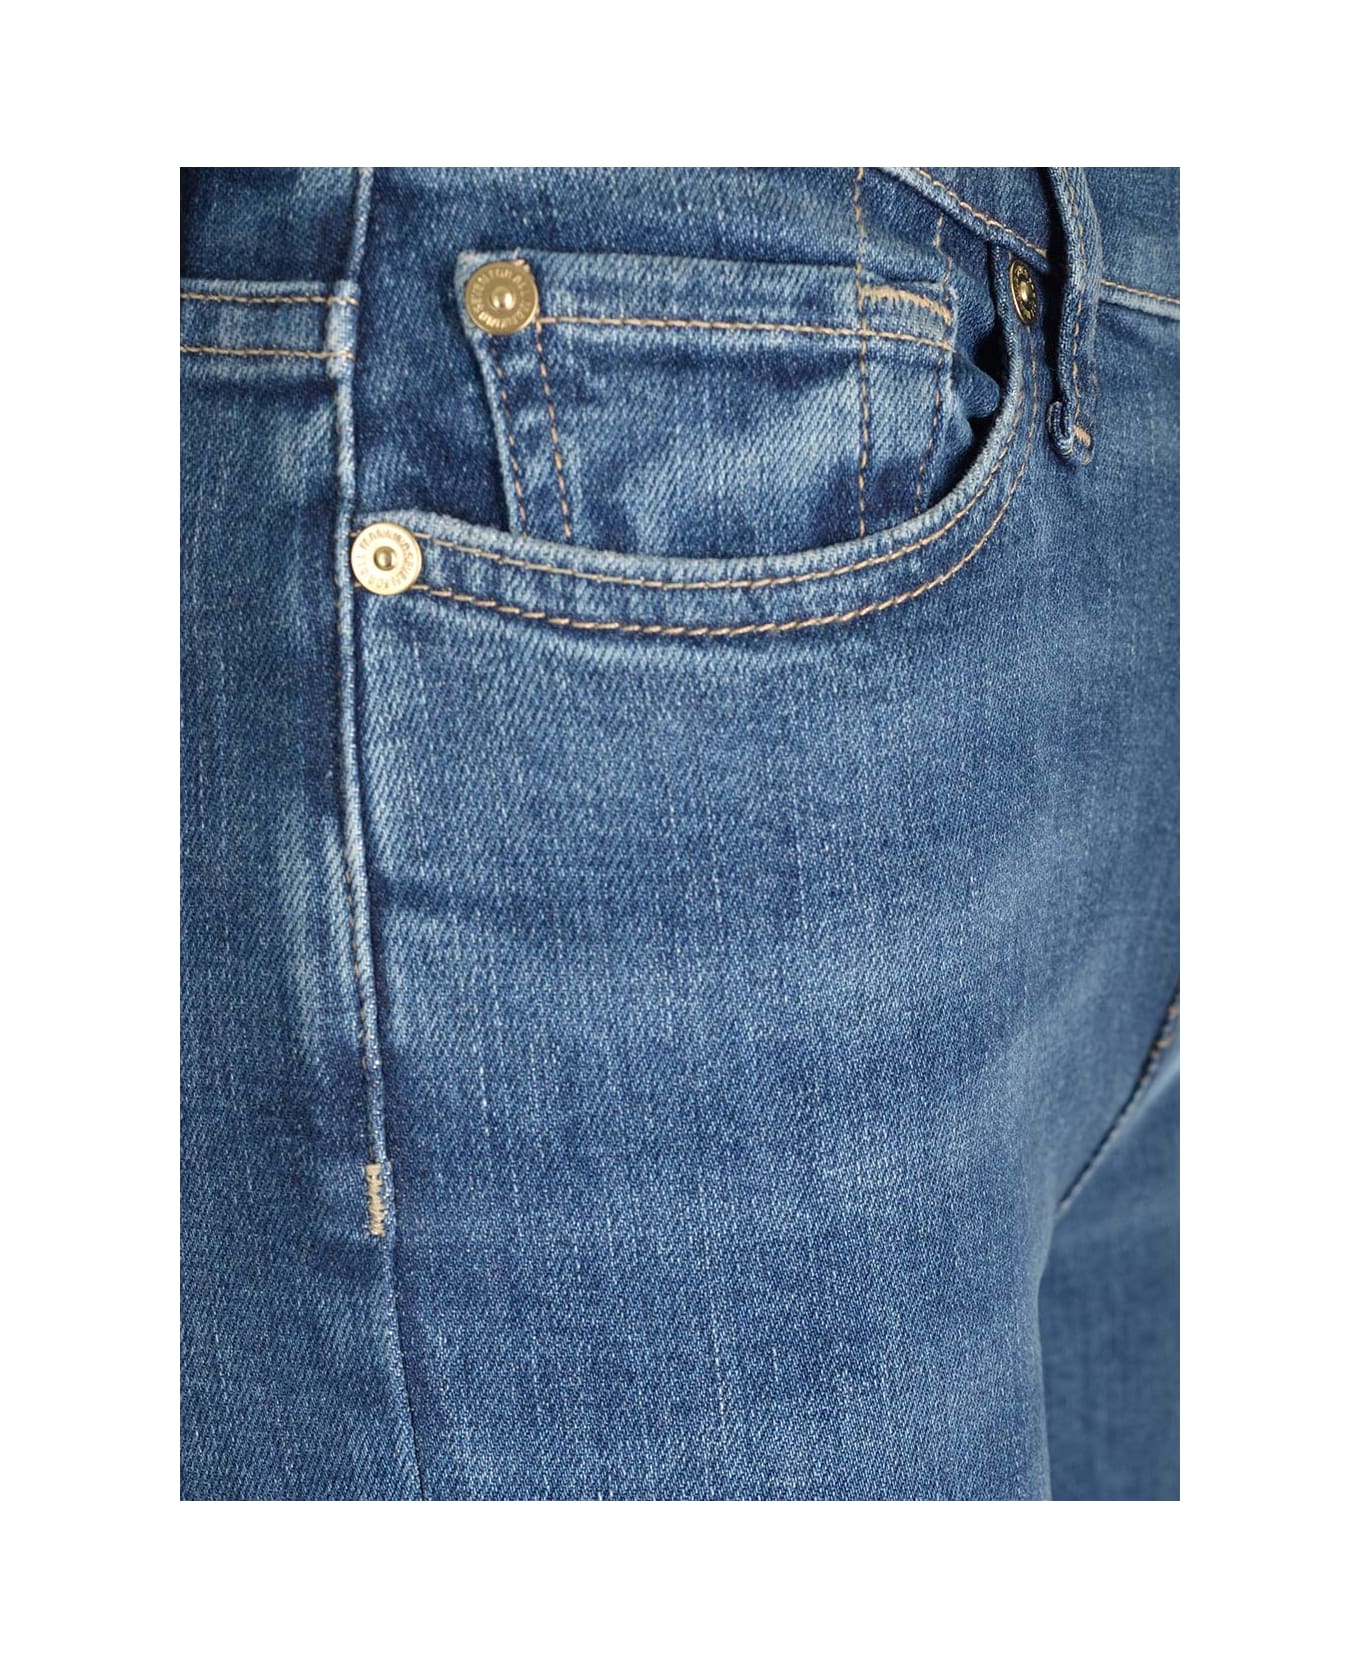 7 For All Mankind 'slim Illusion' Jeans - Blue